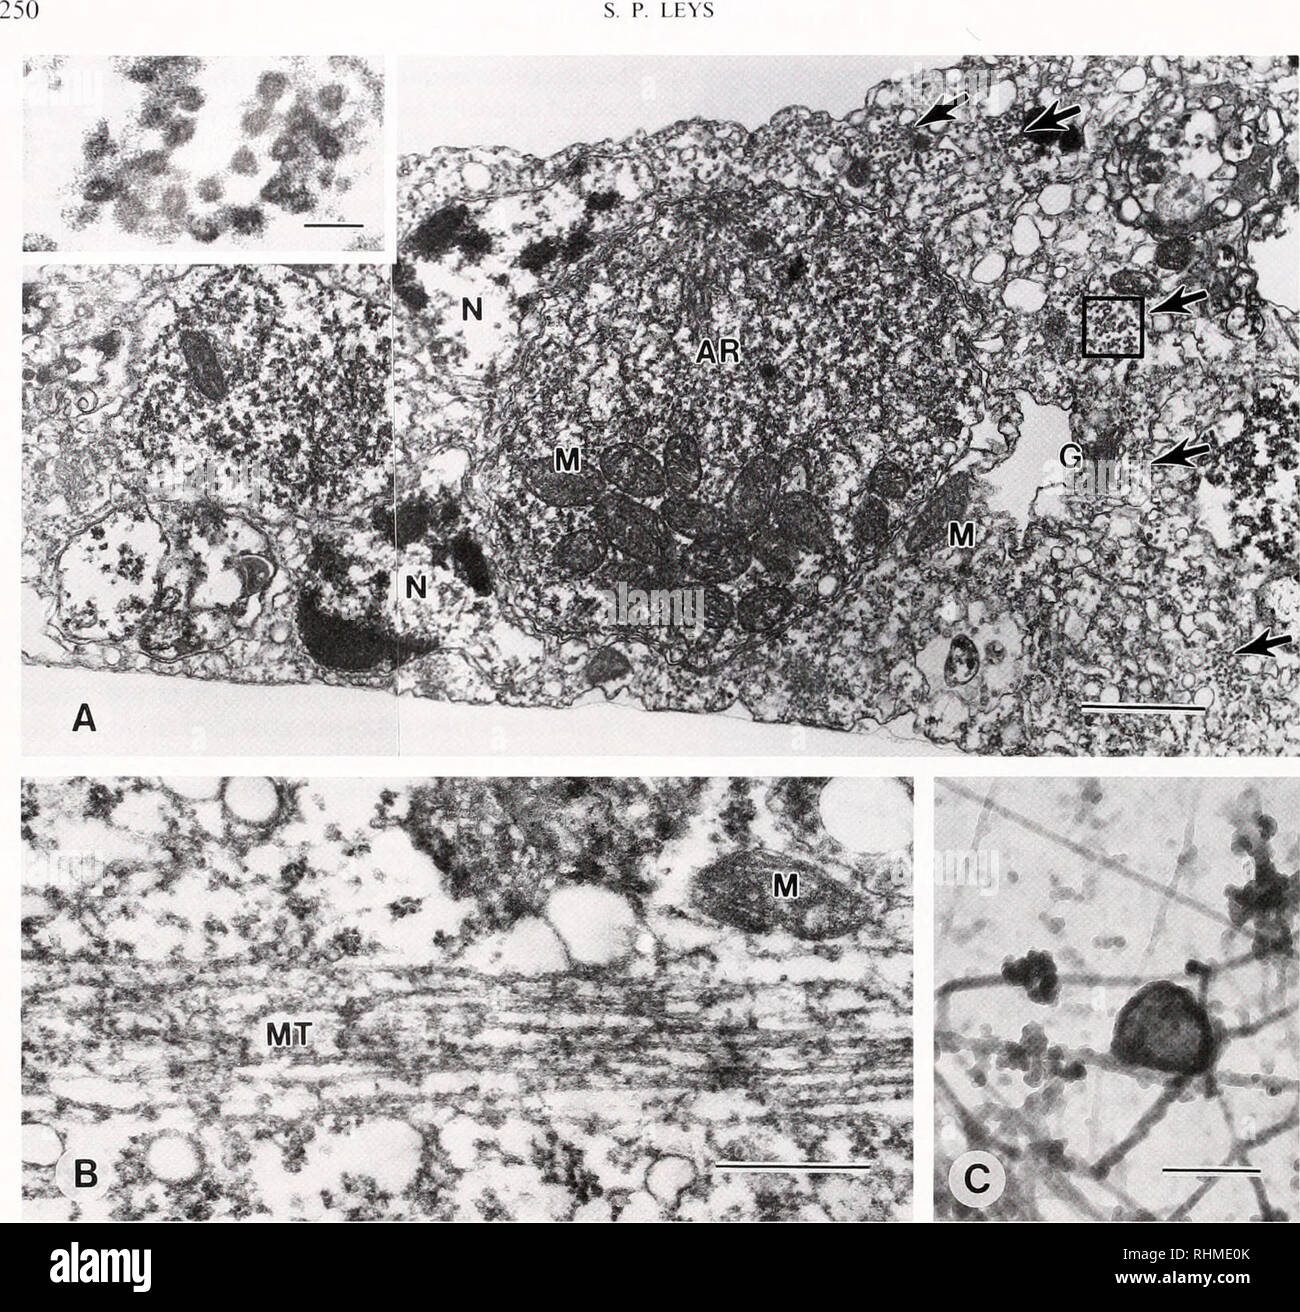 The Biological Bulletin Biology Zoology Biology Marine Biology S P Leys Figure 7 Electron Microscopy Of Adhered Aggregates A In Cross Section Cellular Components Such As Archaeocytes Lie Within The Multinudeated